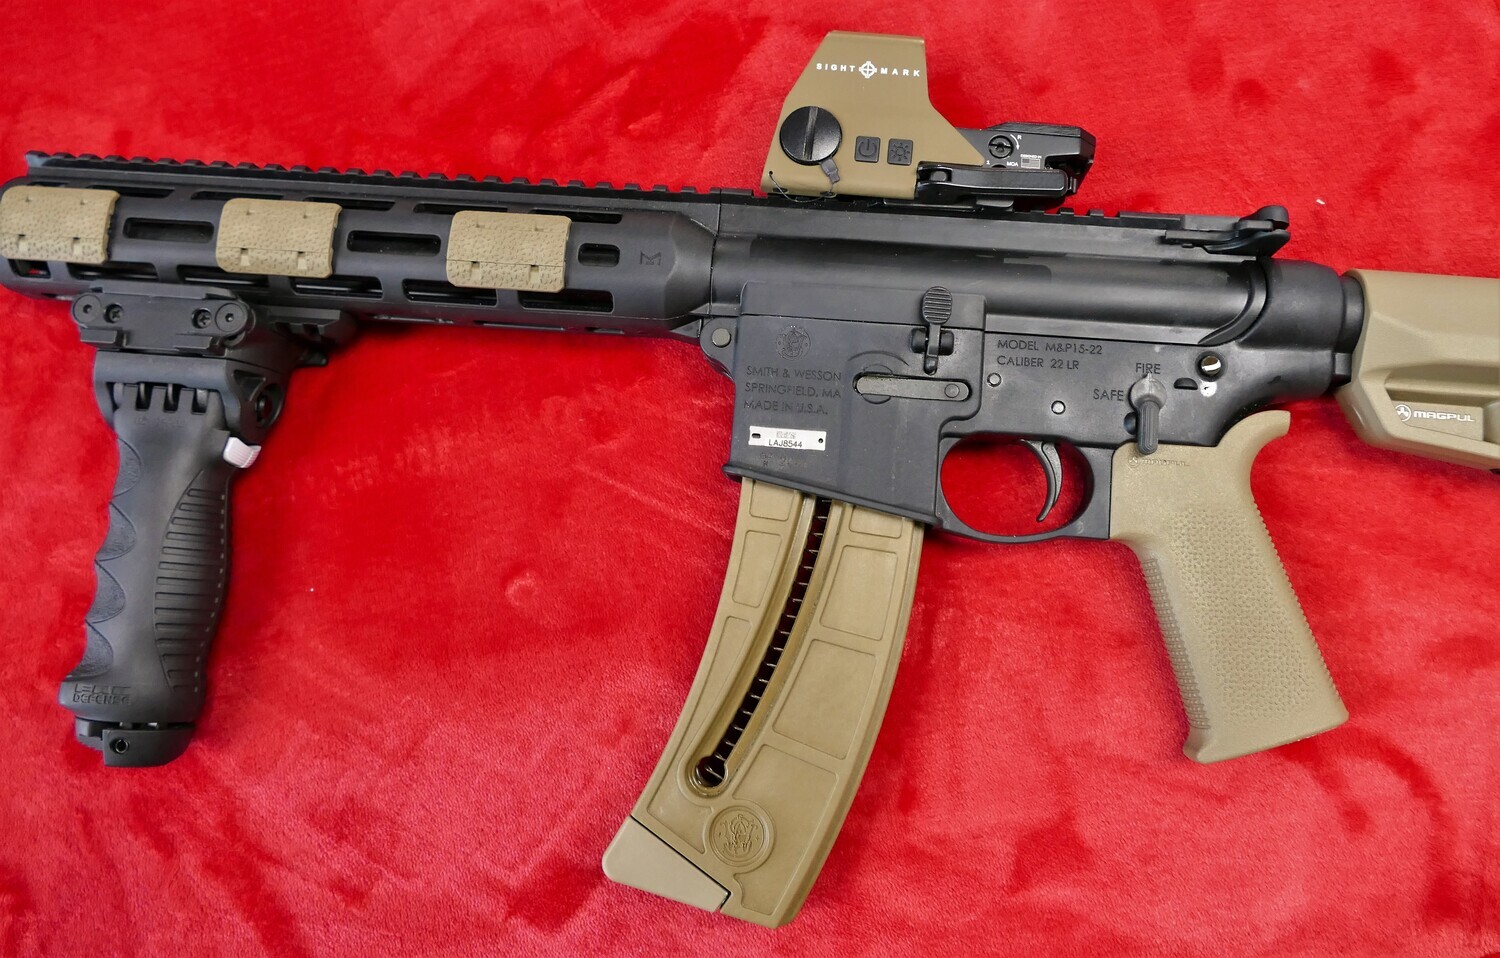 SMITH&WESSON MP 15 22